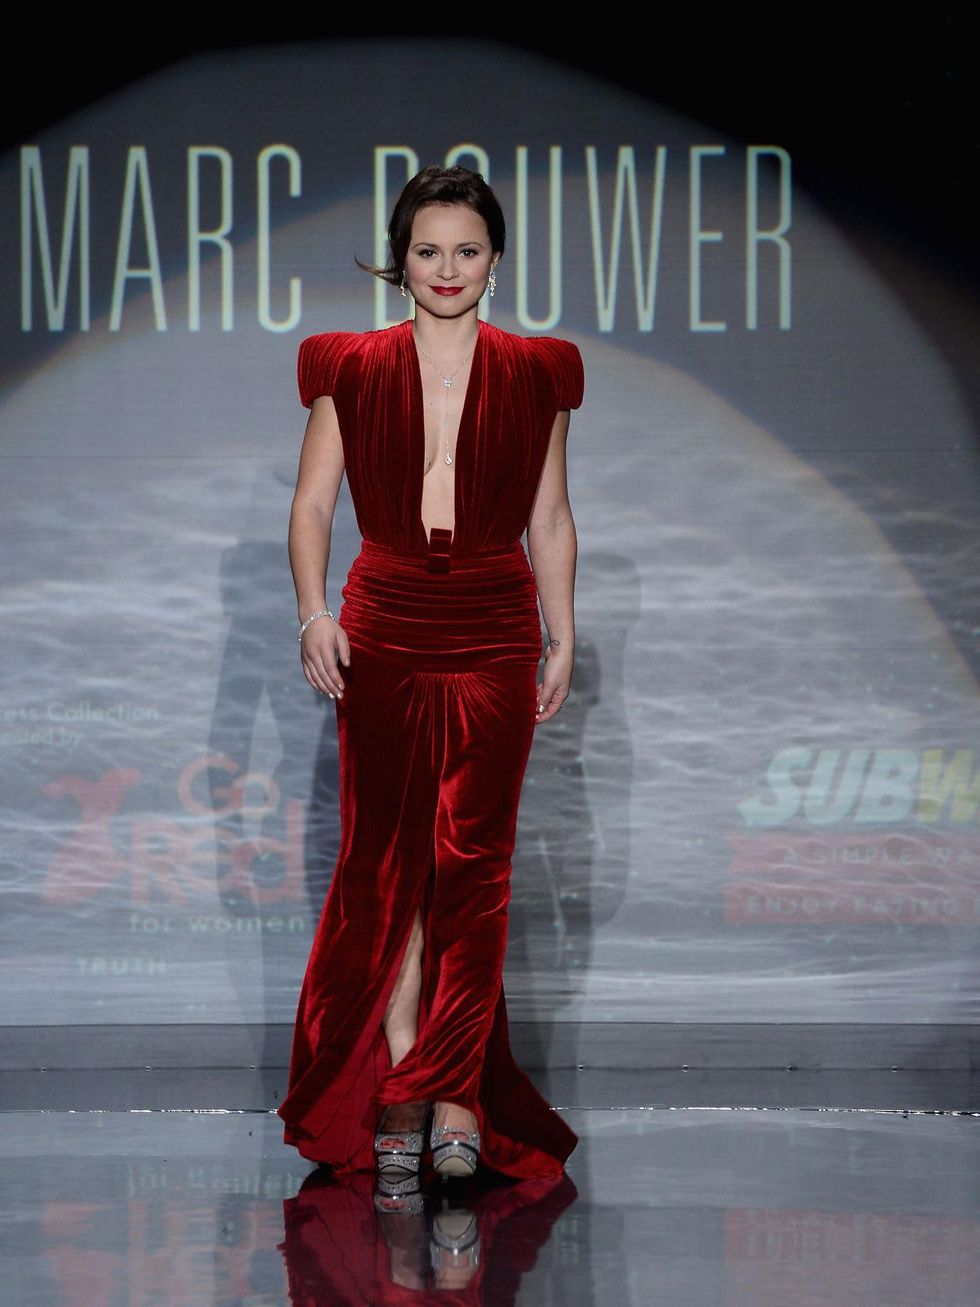 Sasha Cohen walks the runway wearing Marc Bouwer at Go Red For Women February 2014